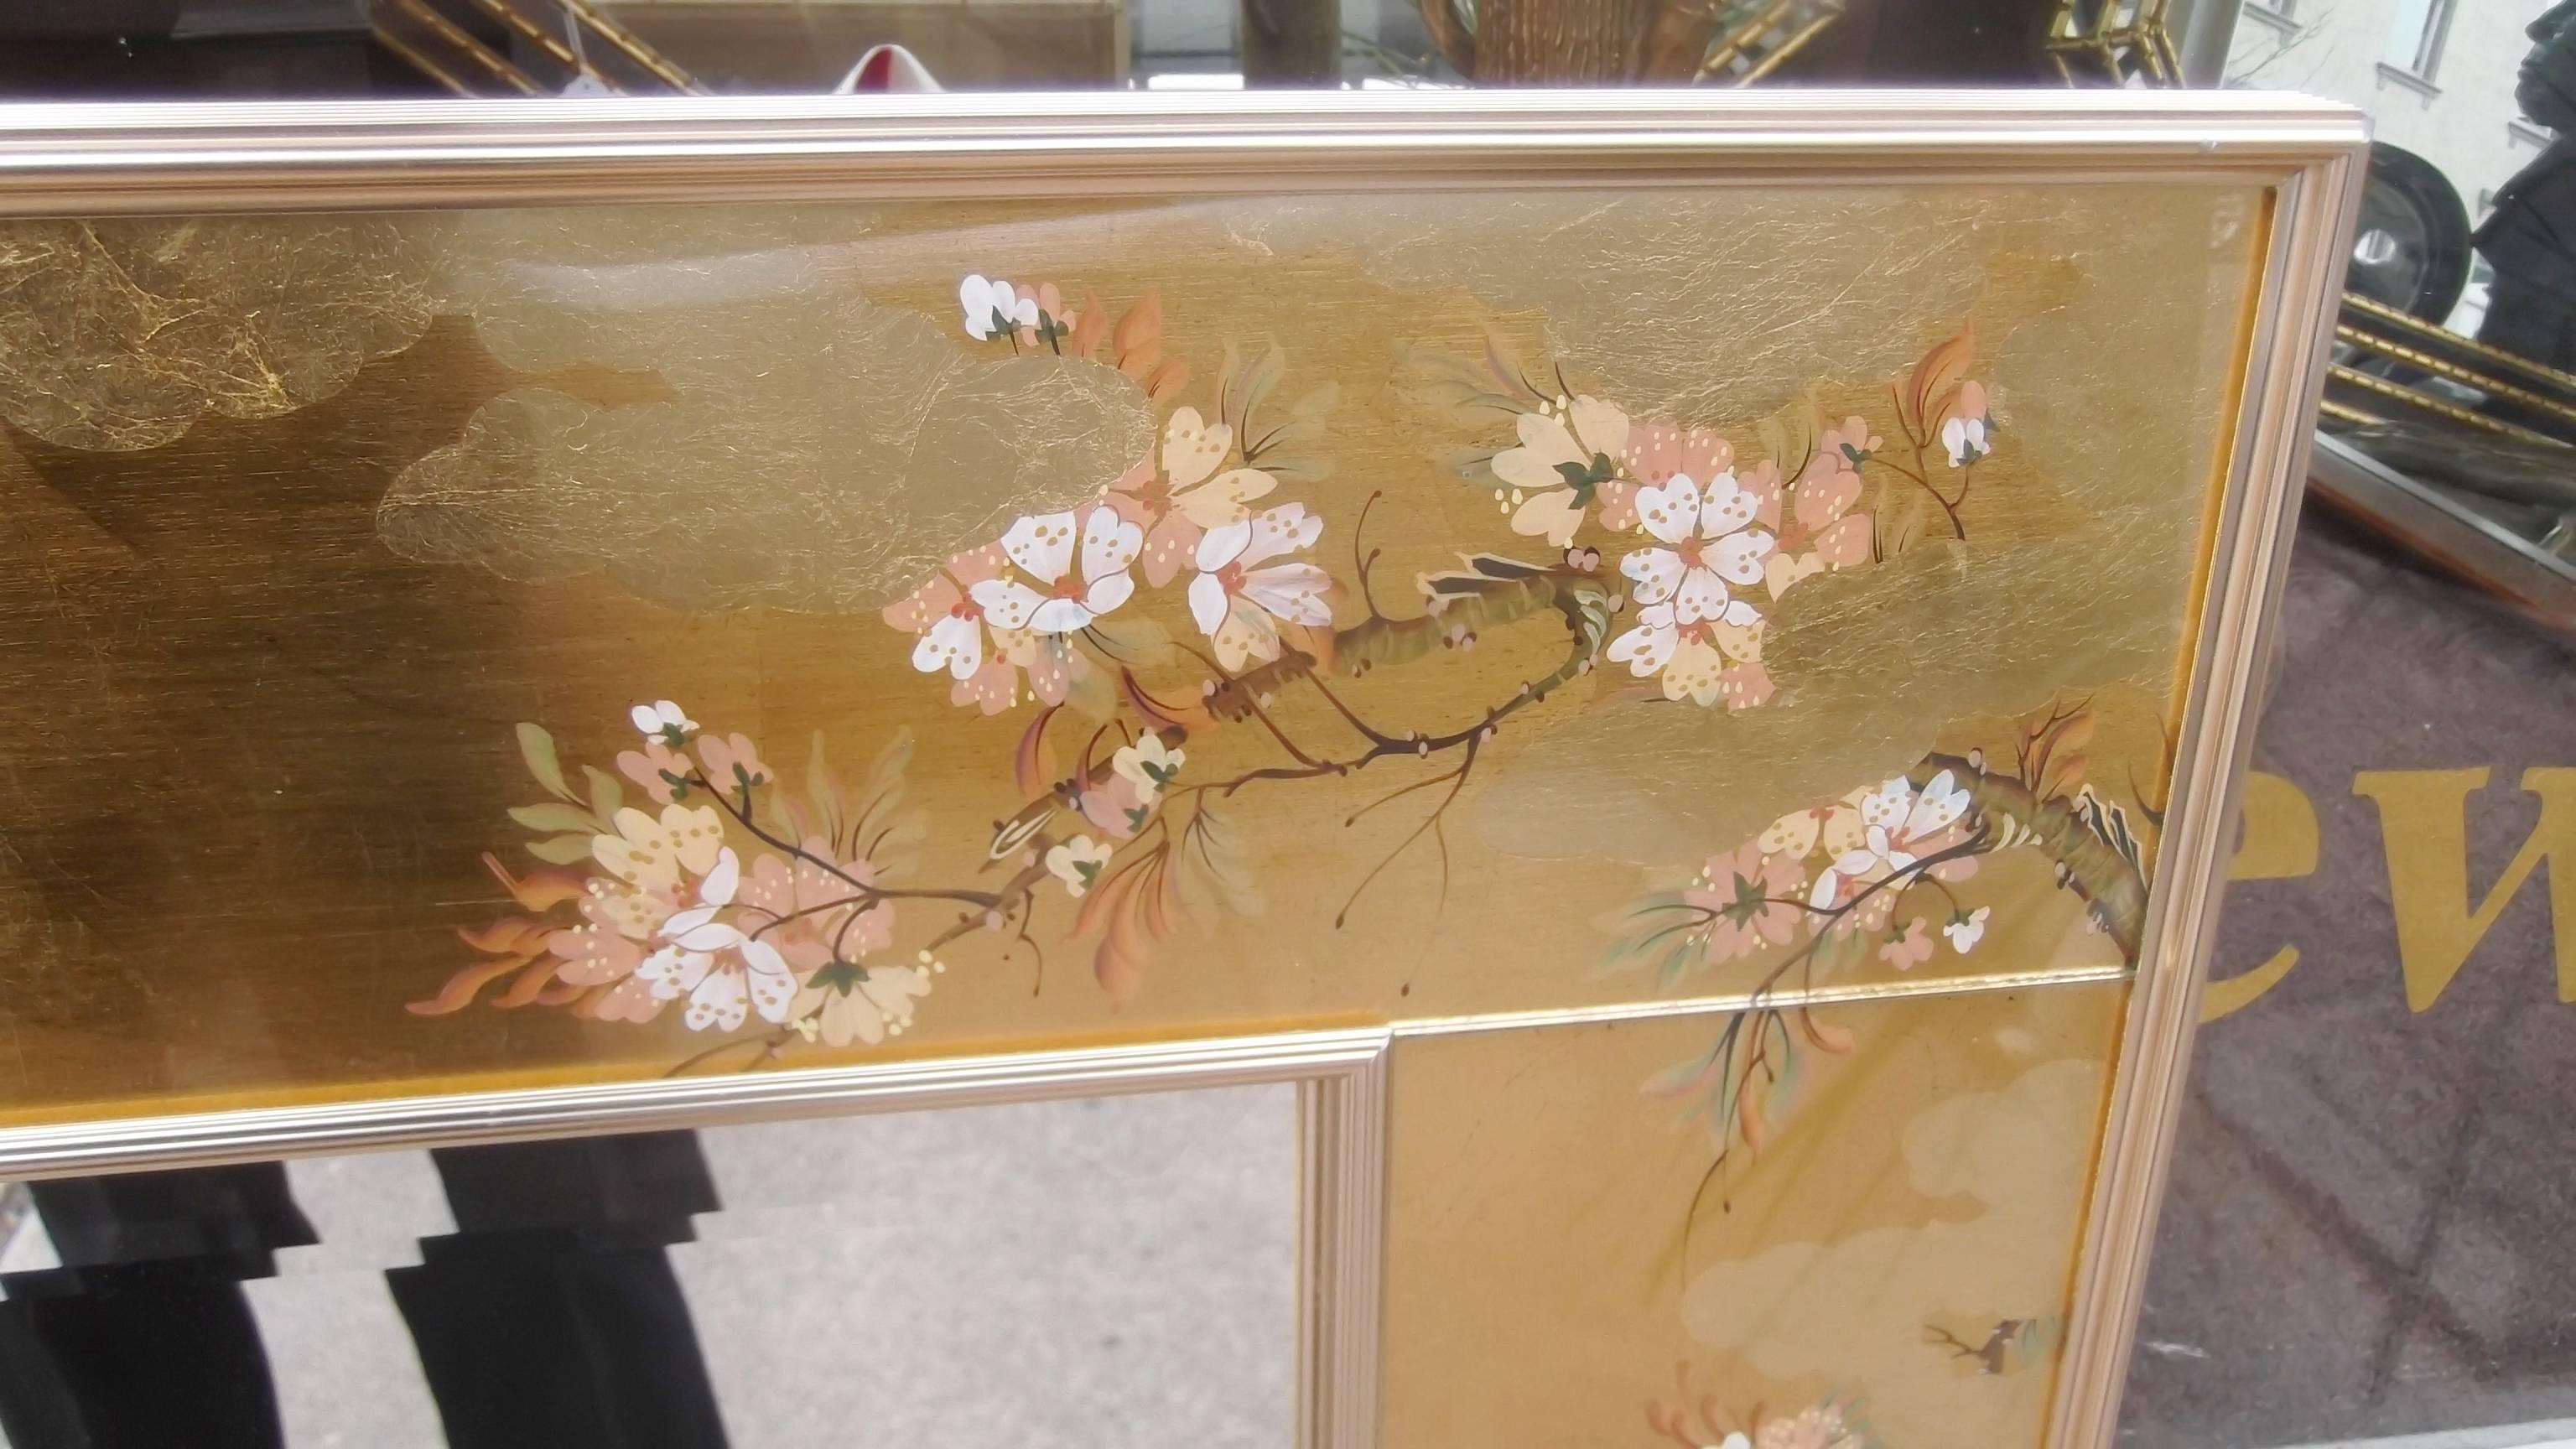 Beautifully reverse hand-painted églomisé beveled mirror.
Made by Labarge, the premiere mirror company, this mirror was artist signed by one of the companies expert hand painters. A rare landscape format, this large mirror is wider than it is